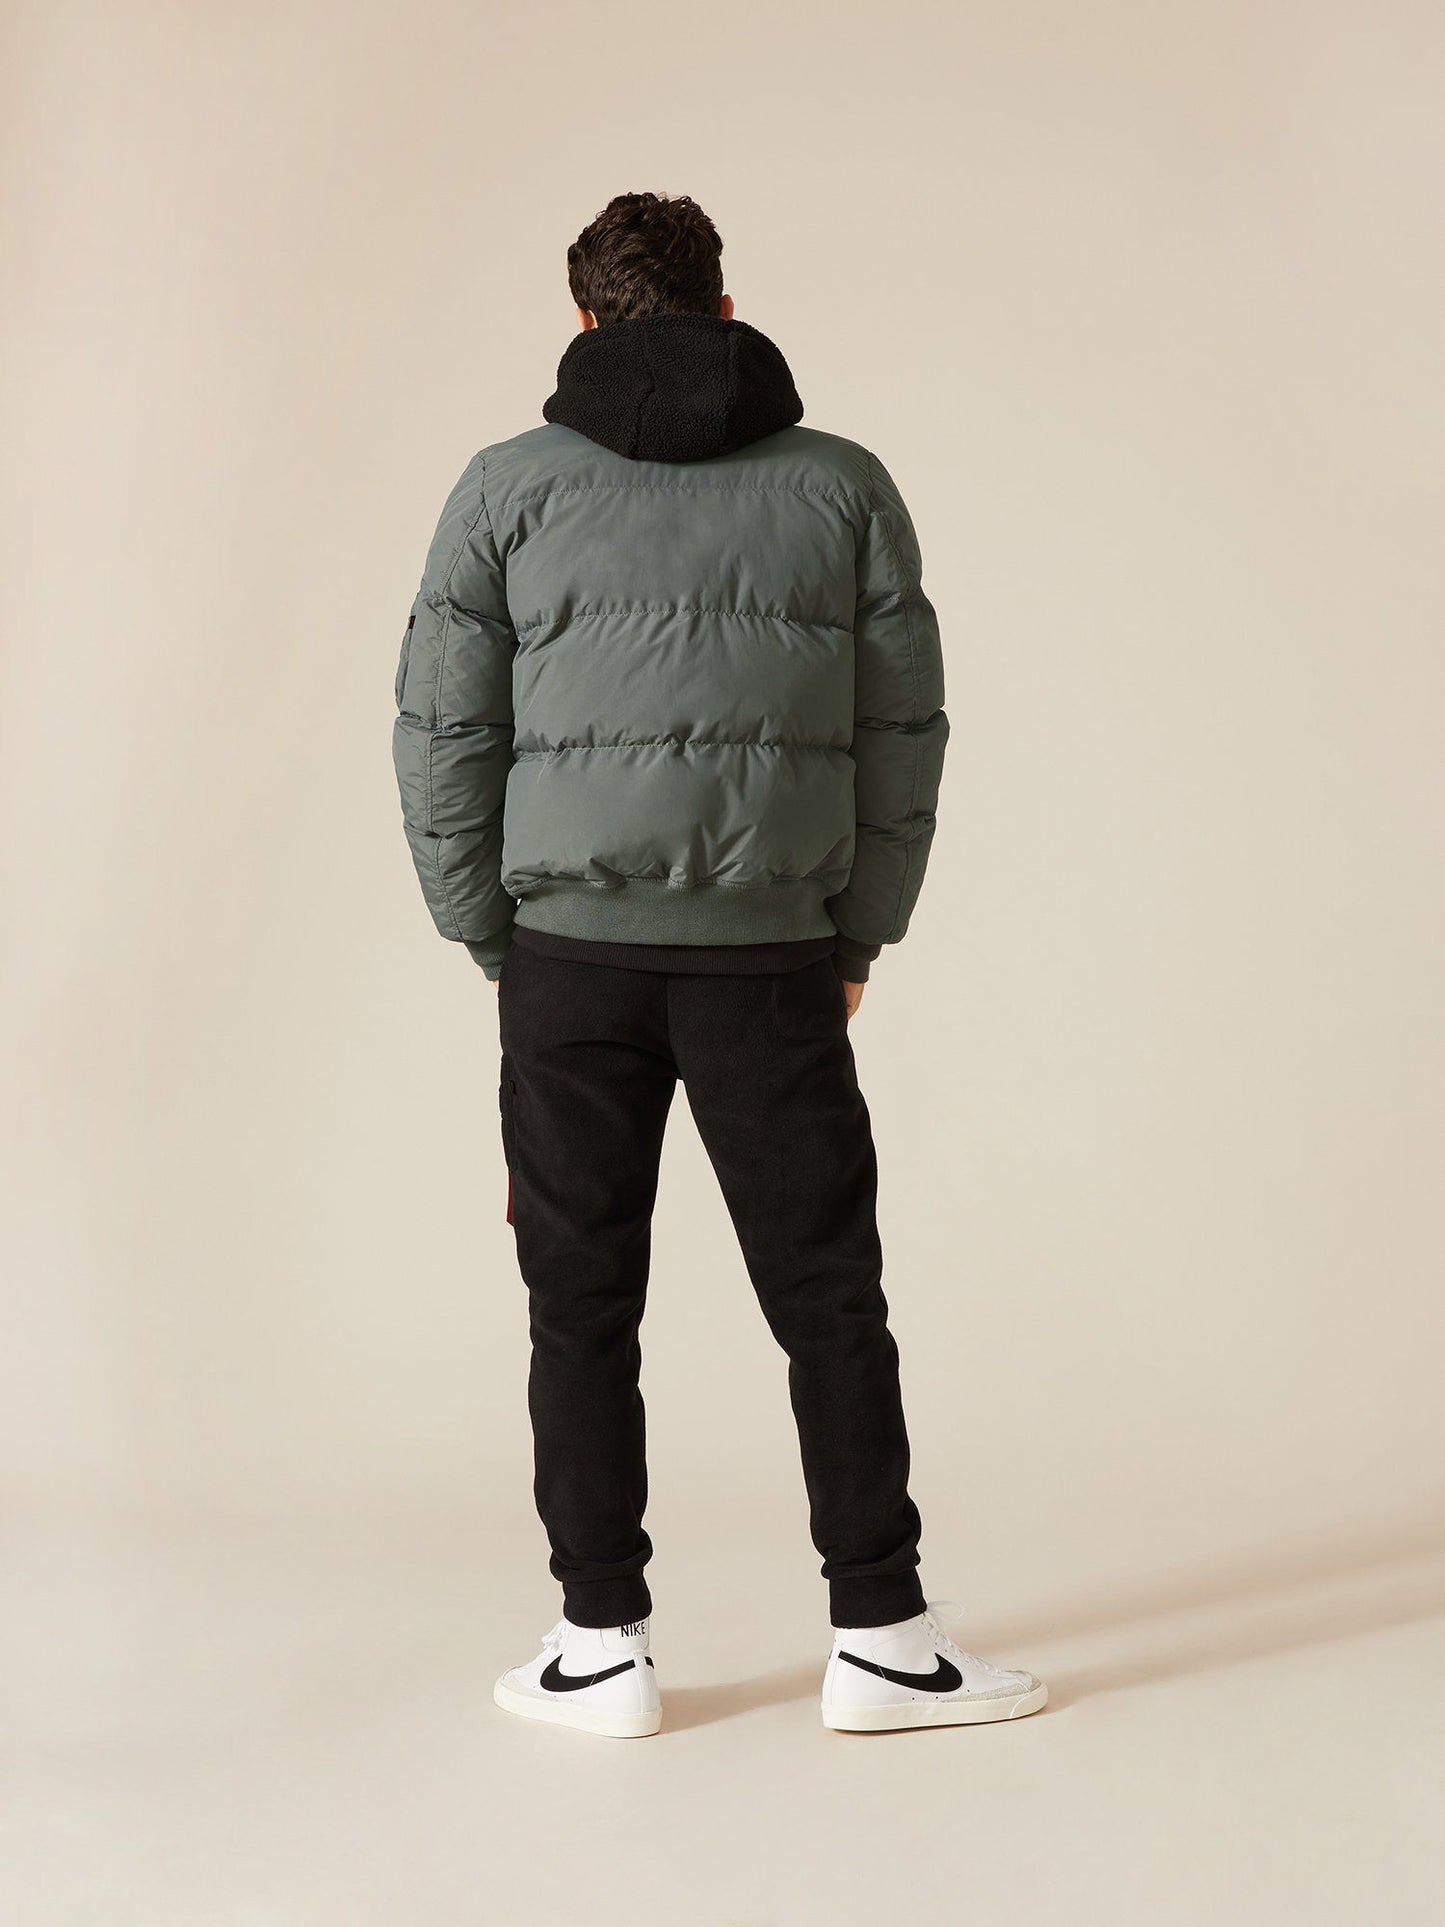 MA-1 QUILTED FLIGHT JACKET OUTERWEAR GUNMETAL Alpha Industries, Inc. 